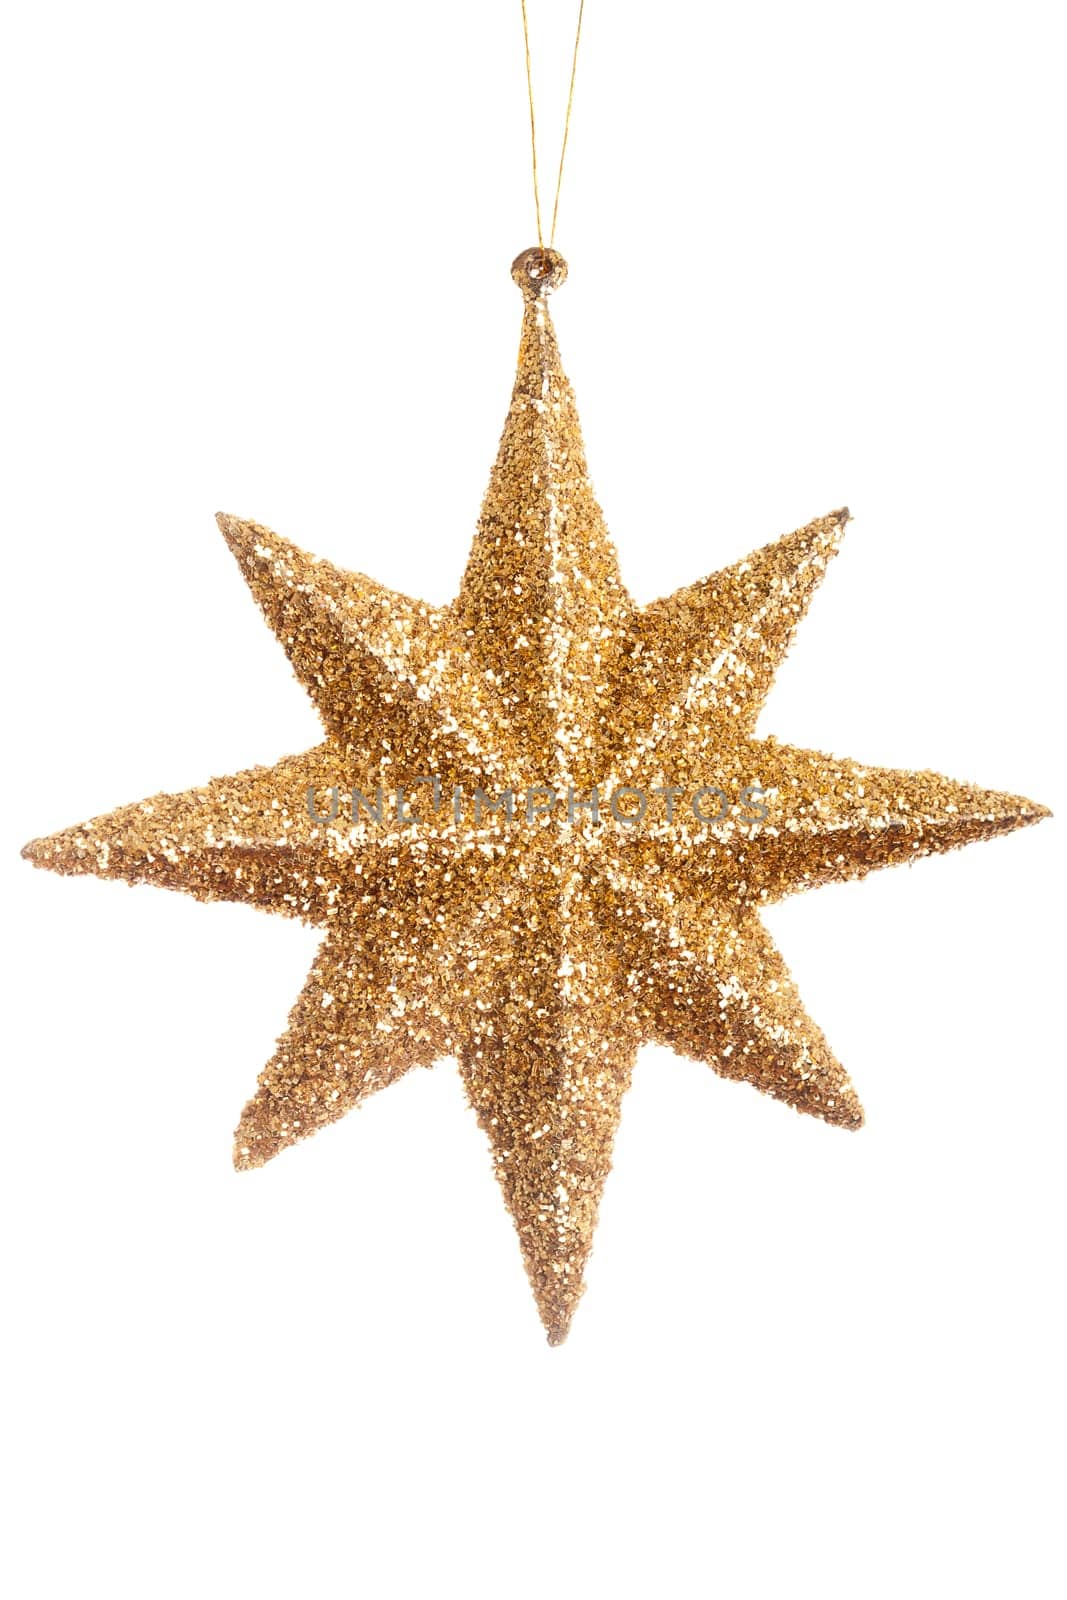 Christmas yellow shiny star isolated over white background by DCStudio